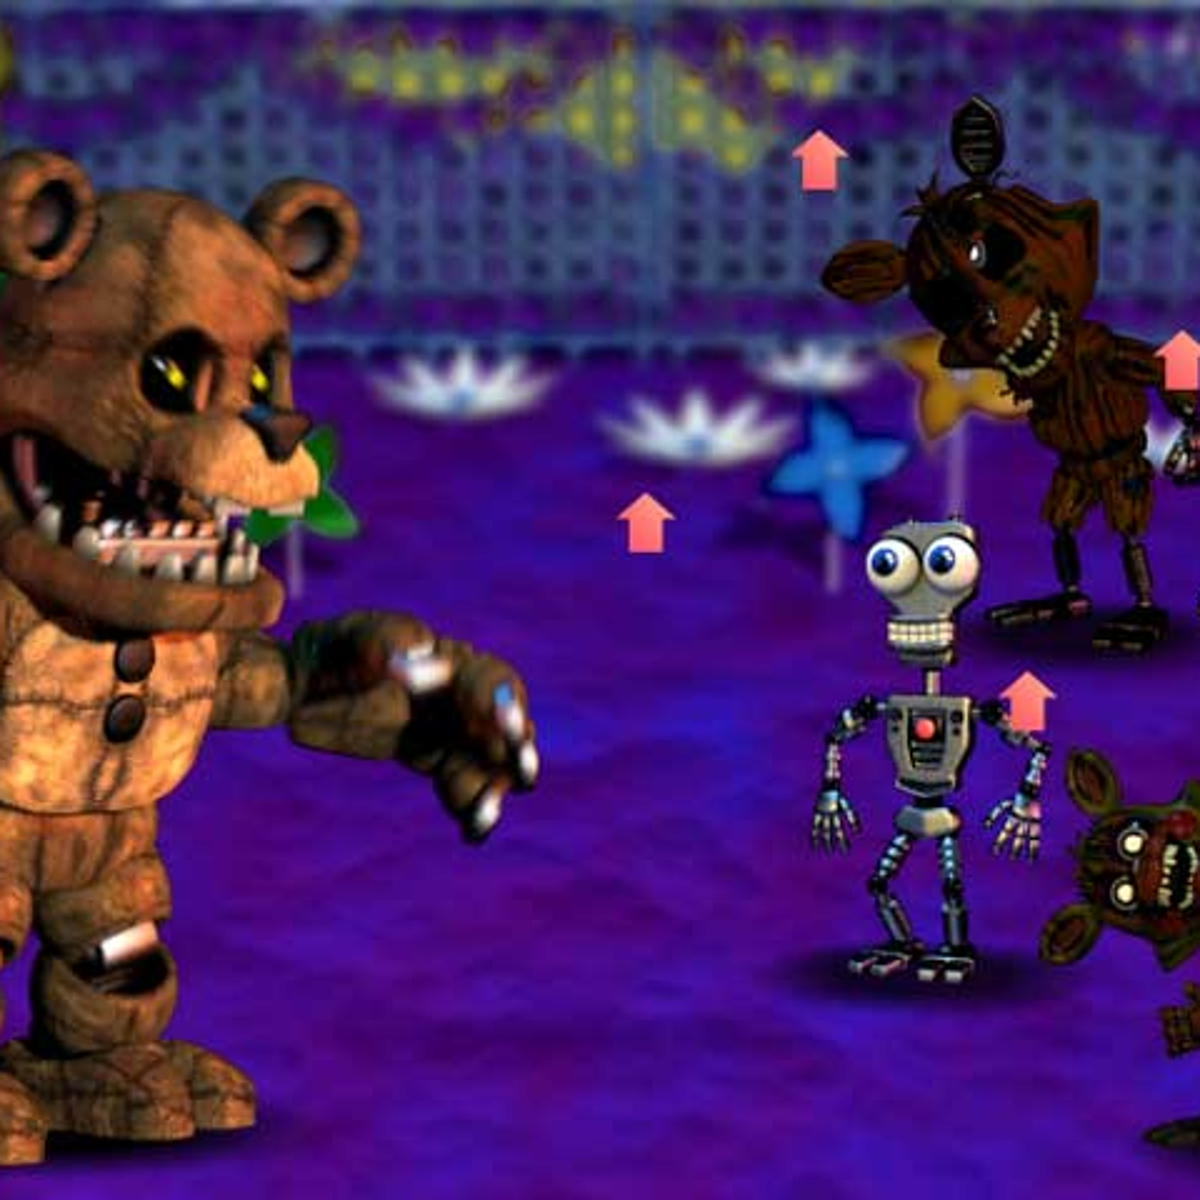 FNaF World released too early, Five Nights at Freddy's creator